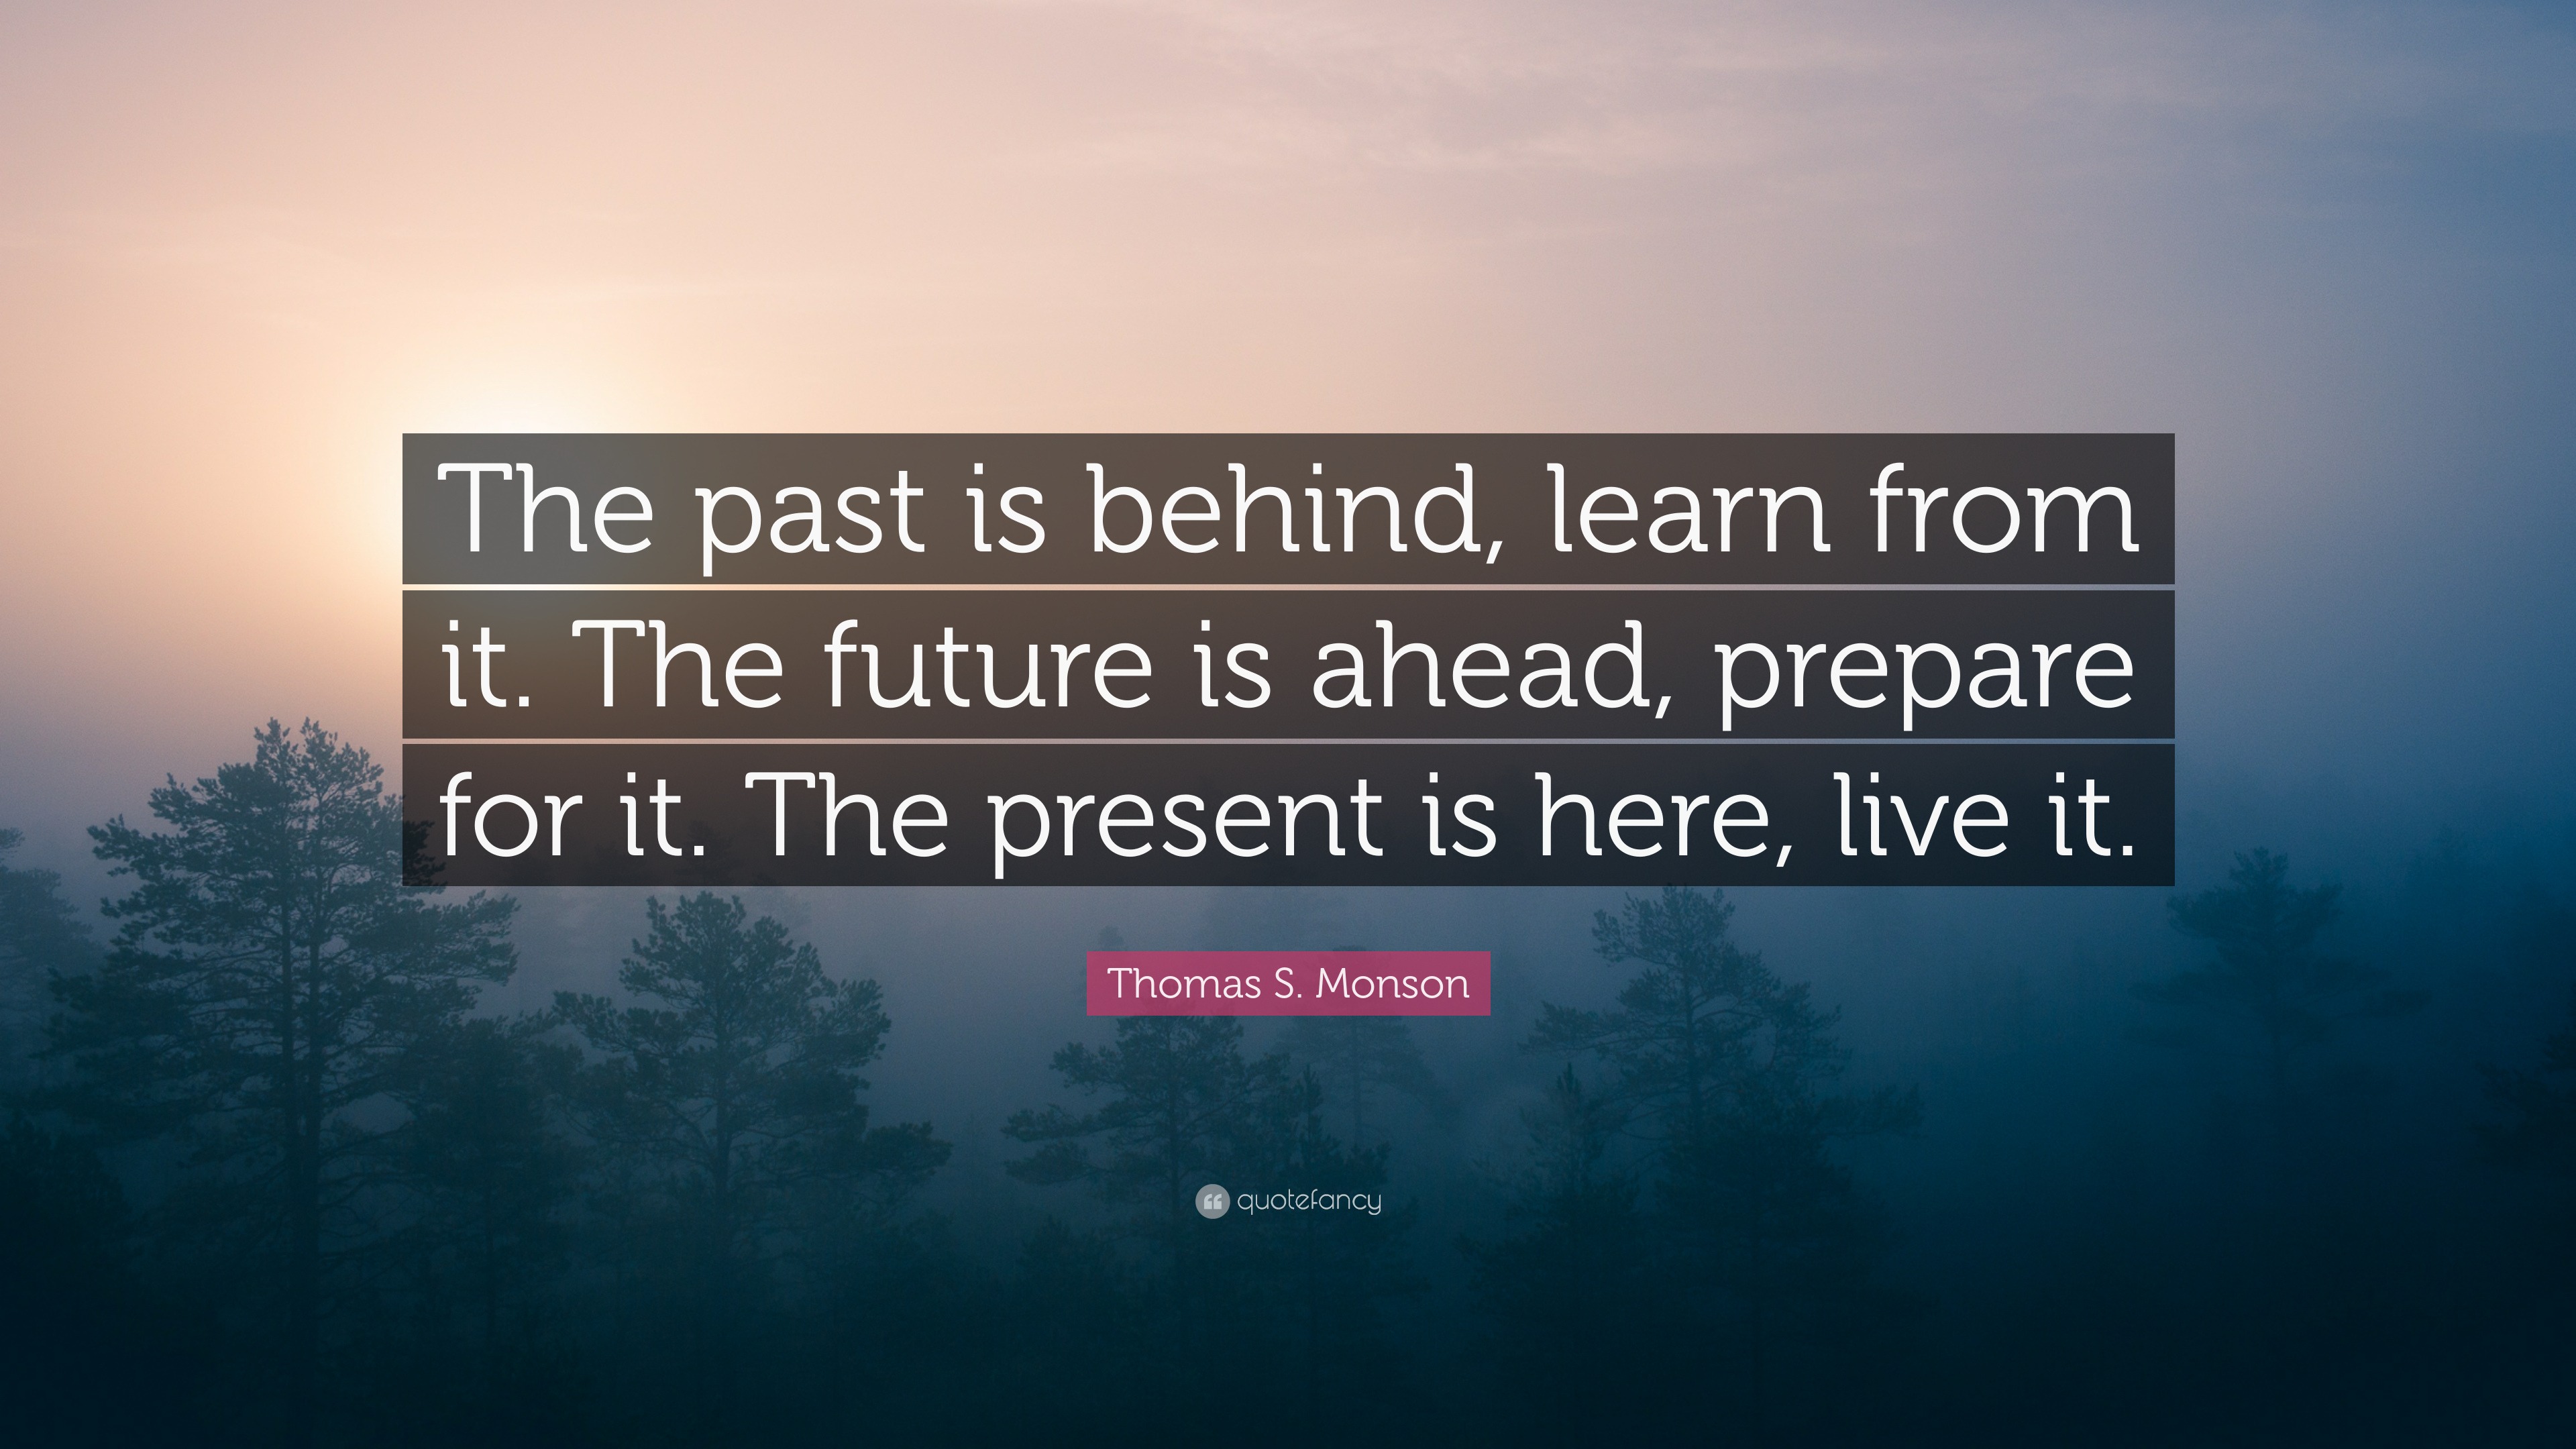 Thomas S. Monson Quote: “The past is behind, learn from it. The future ...